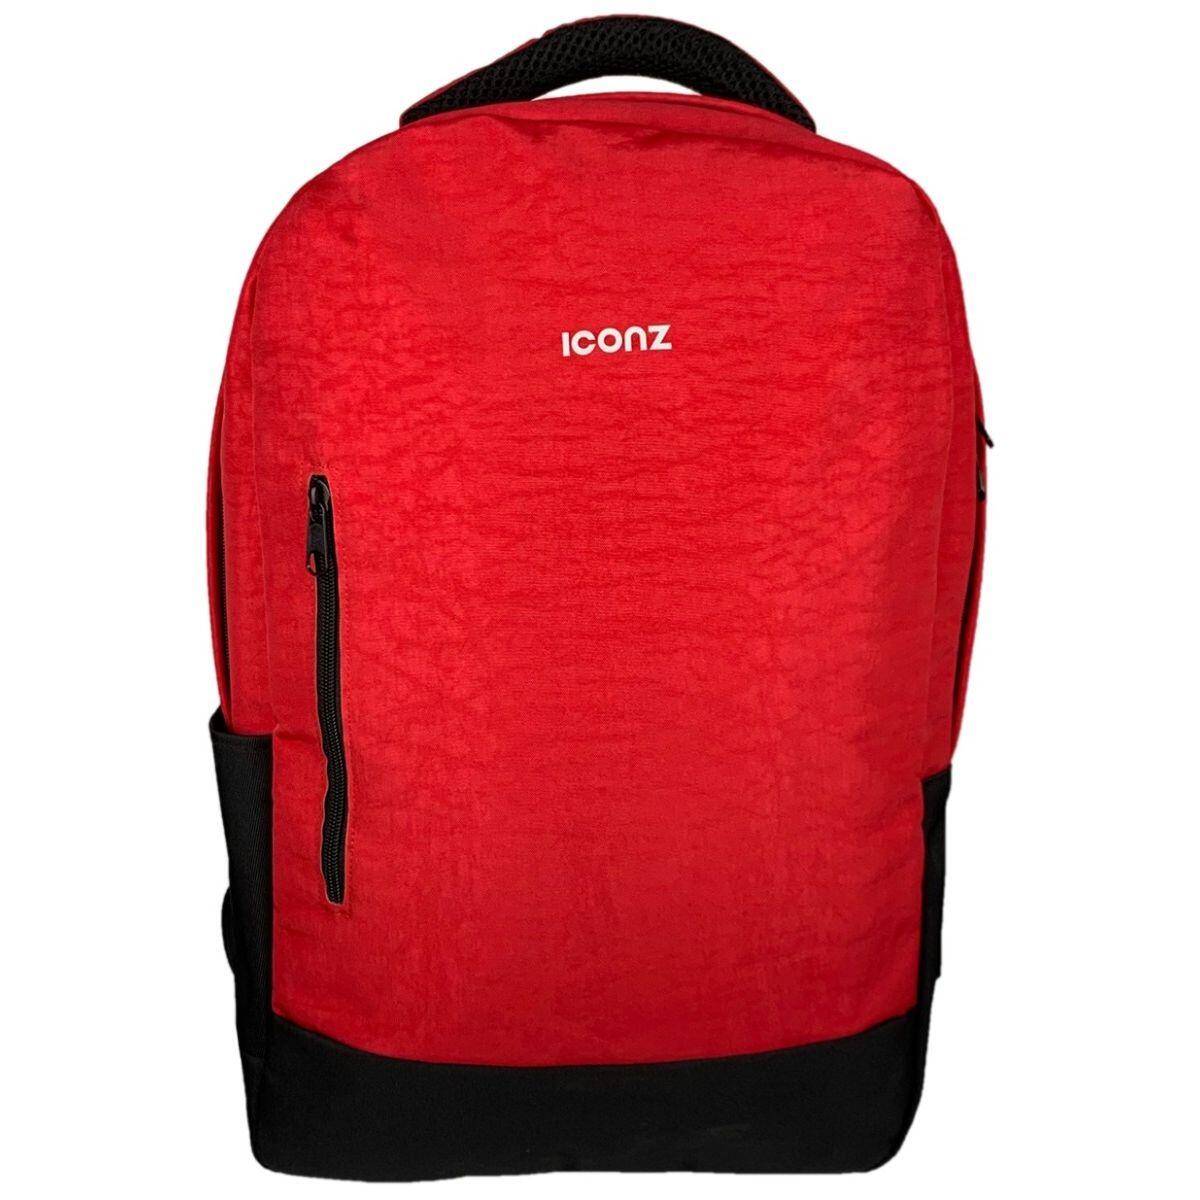 Iconz Laptop Backpack, Red, 4032